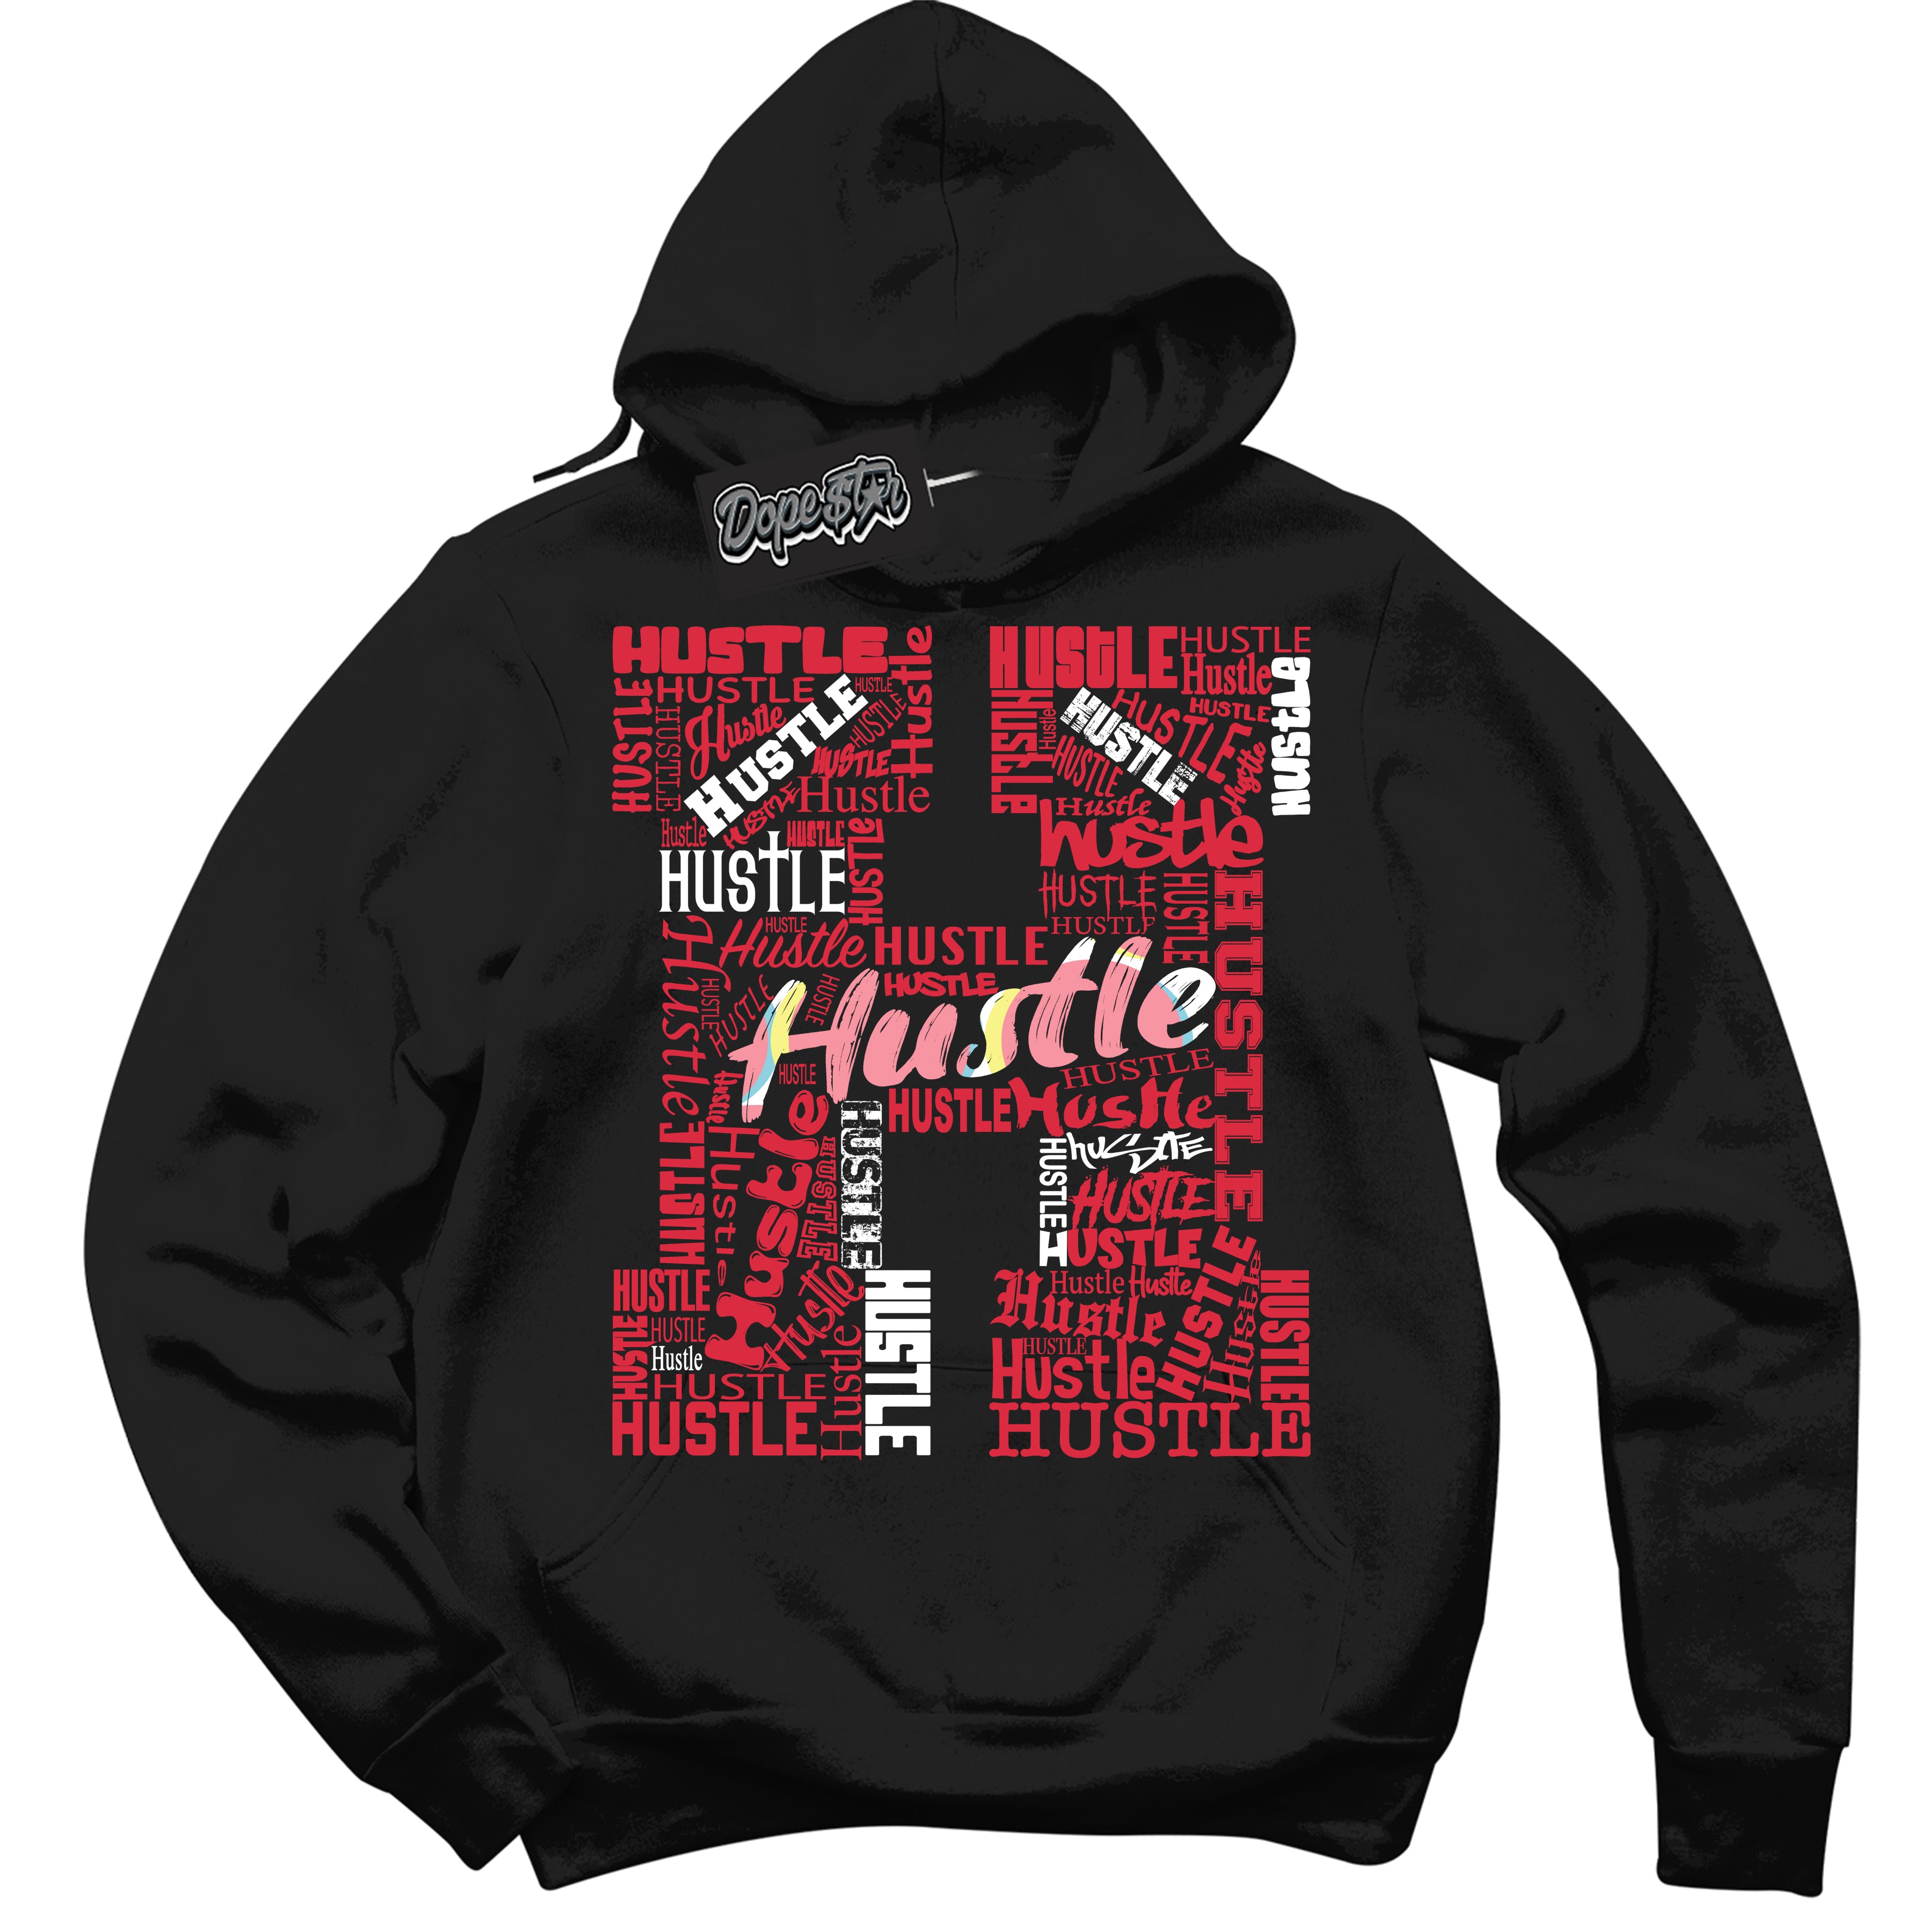 Cool Black Graphic DopeStar Hoodie with “ Hustle H “ print, that perfectly matches Spider-Verse 1s sneakers